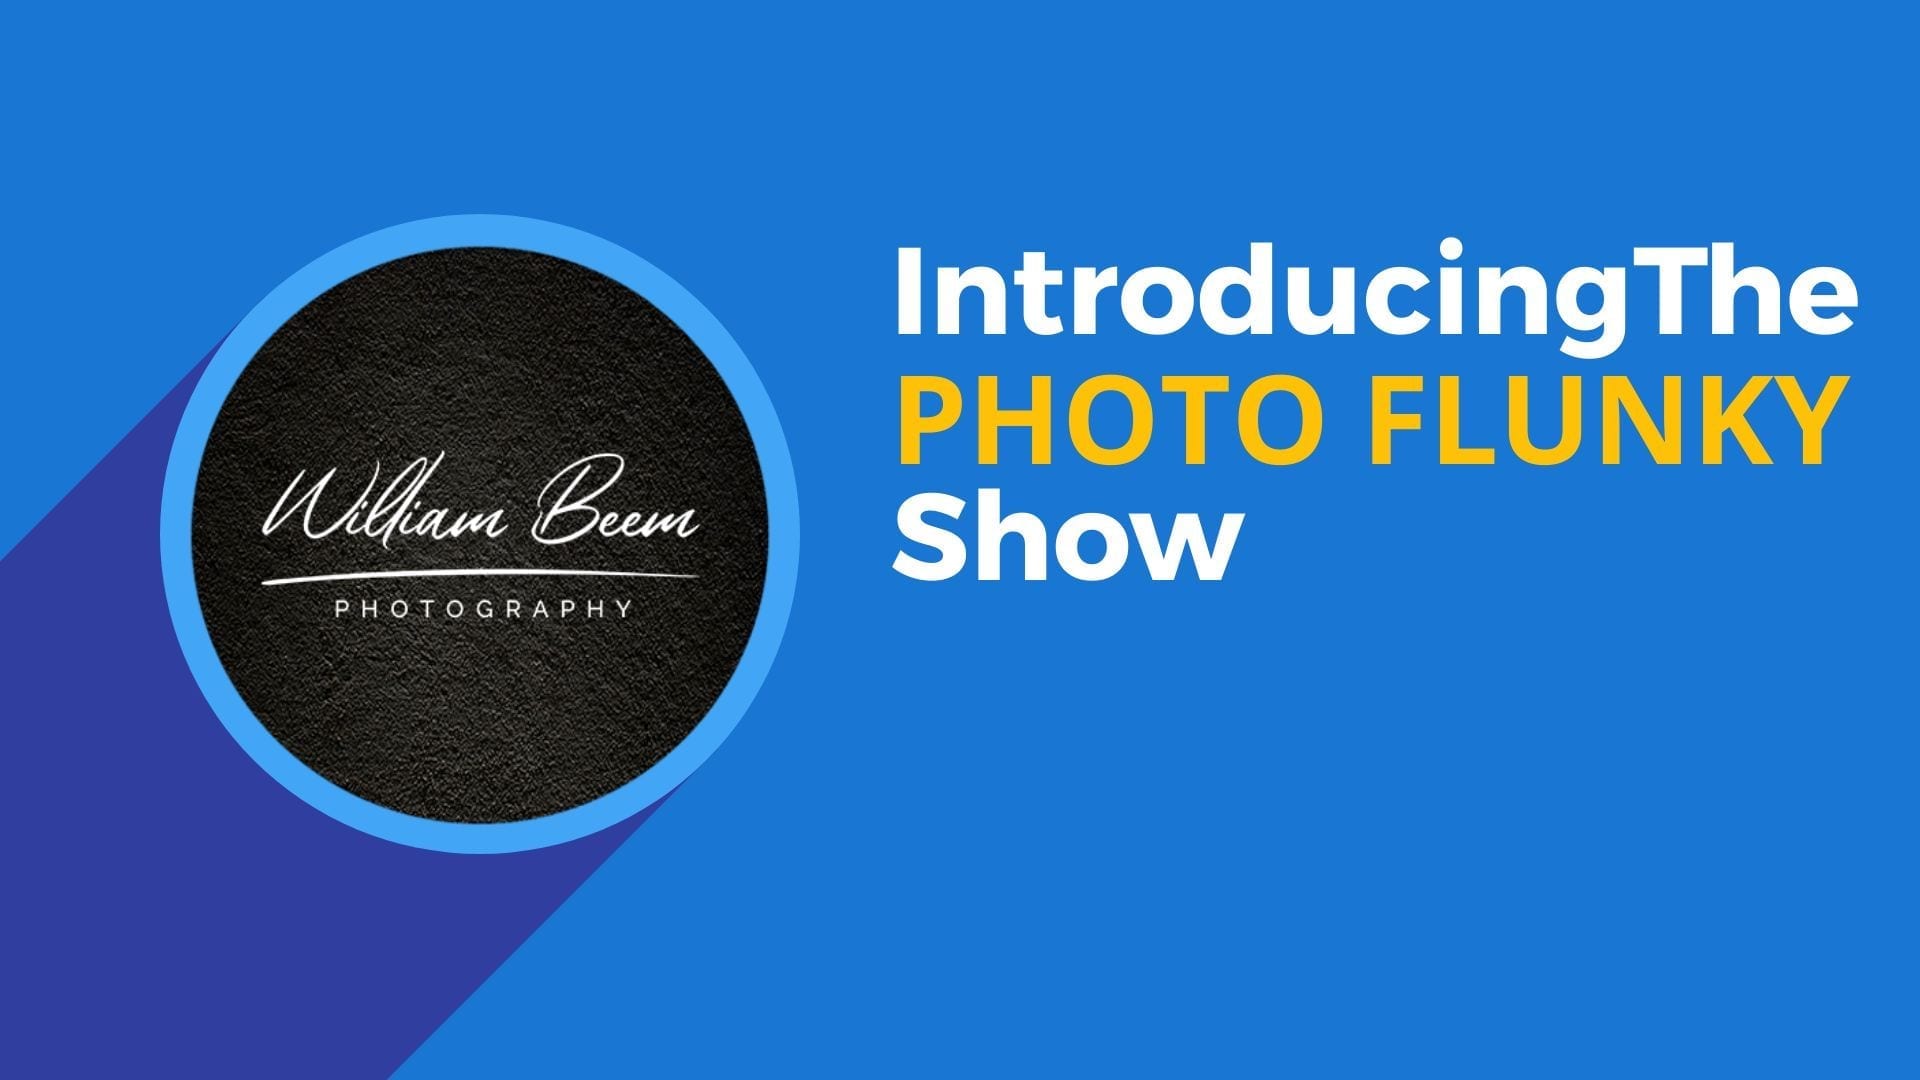 Introducing the Photo Flunky Show